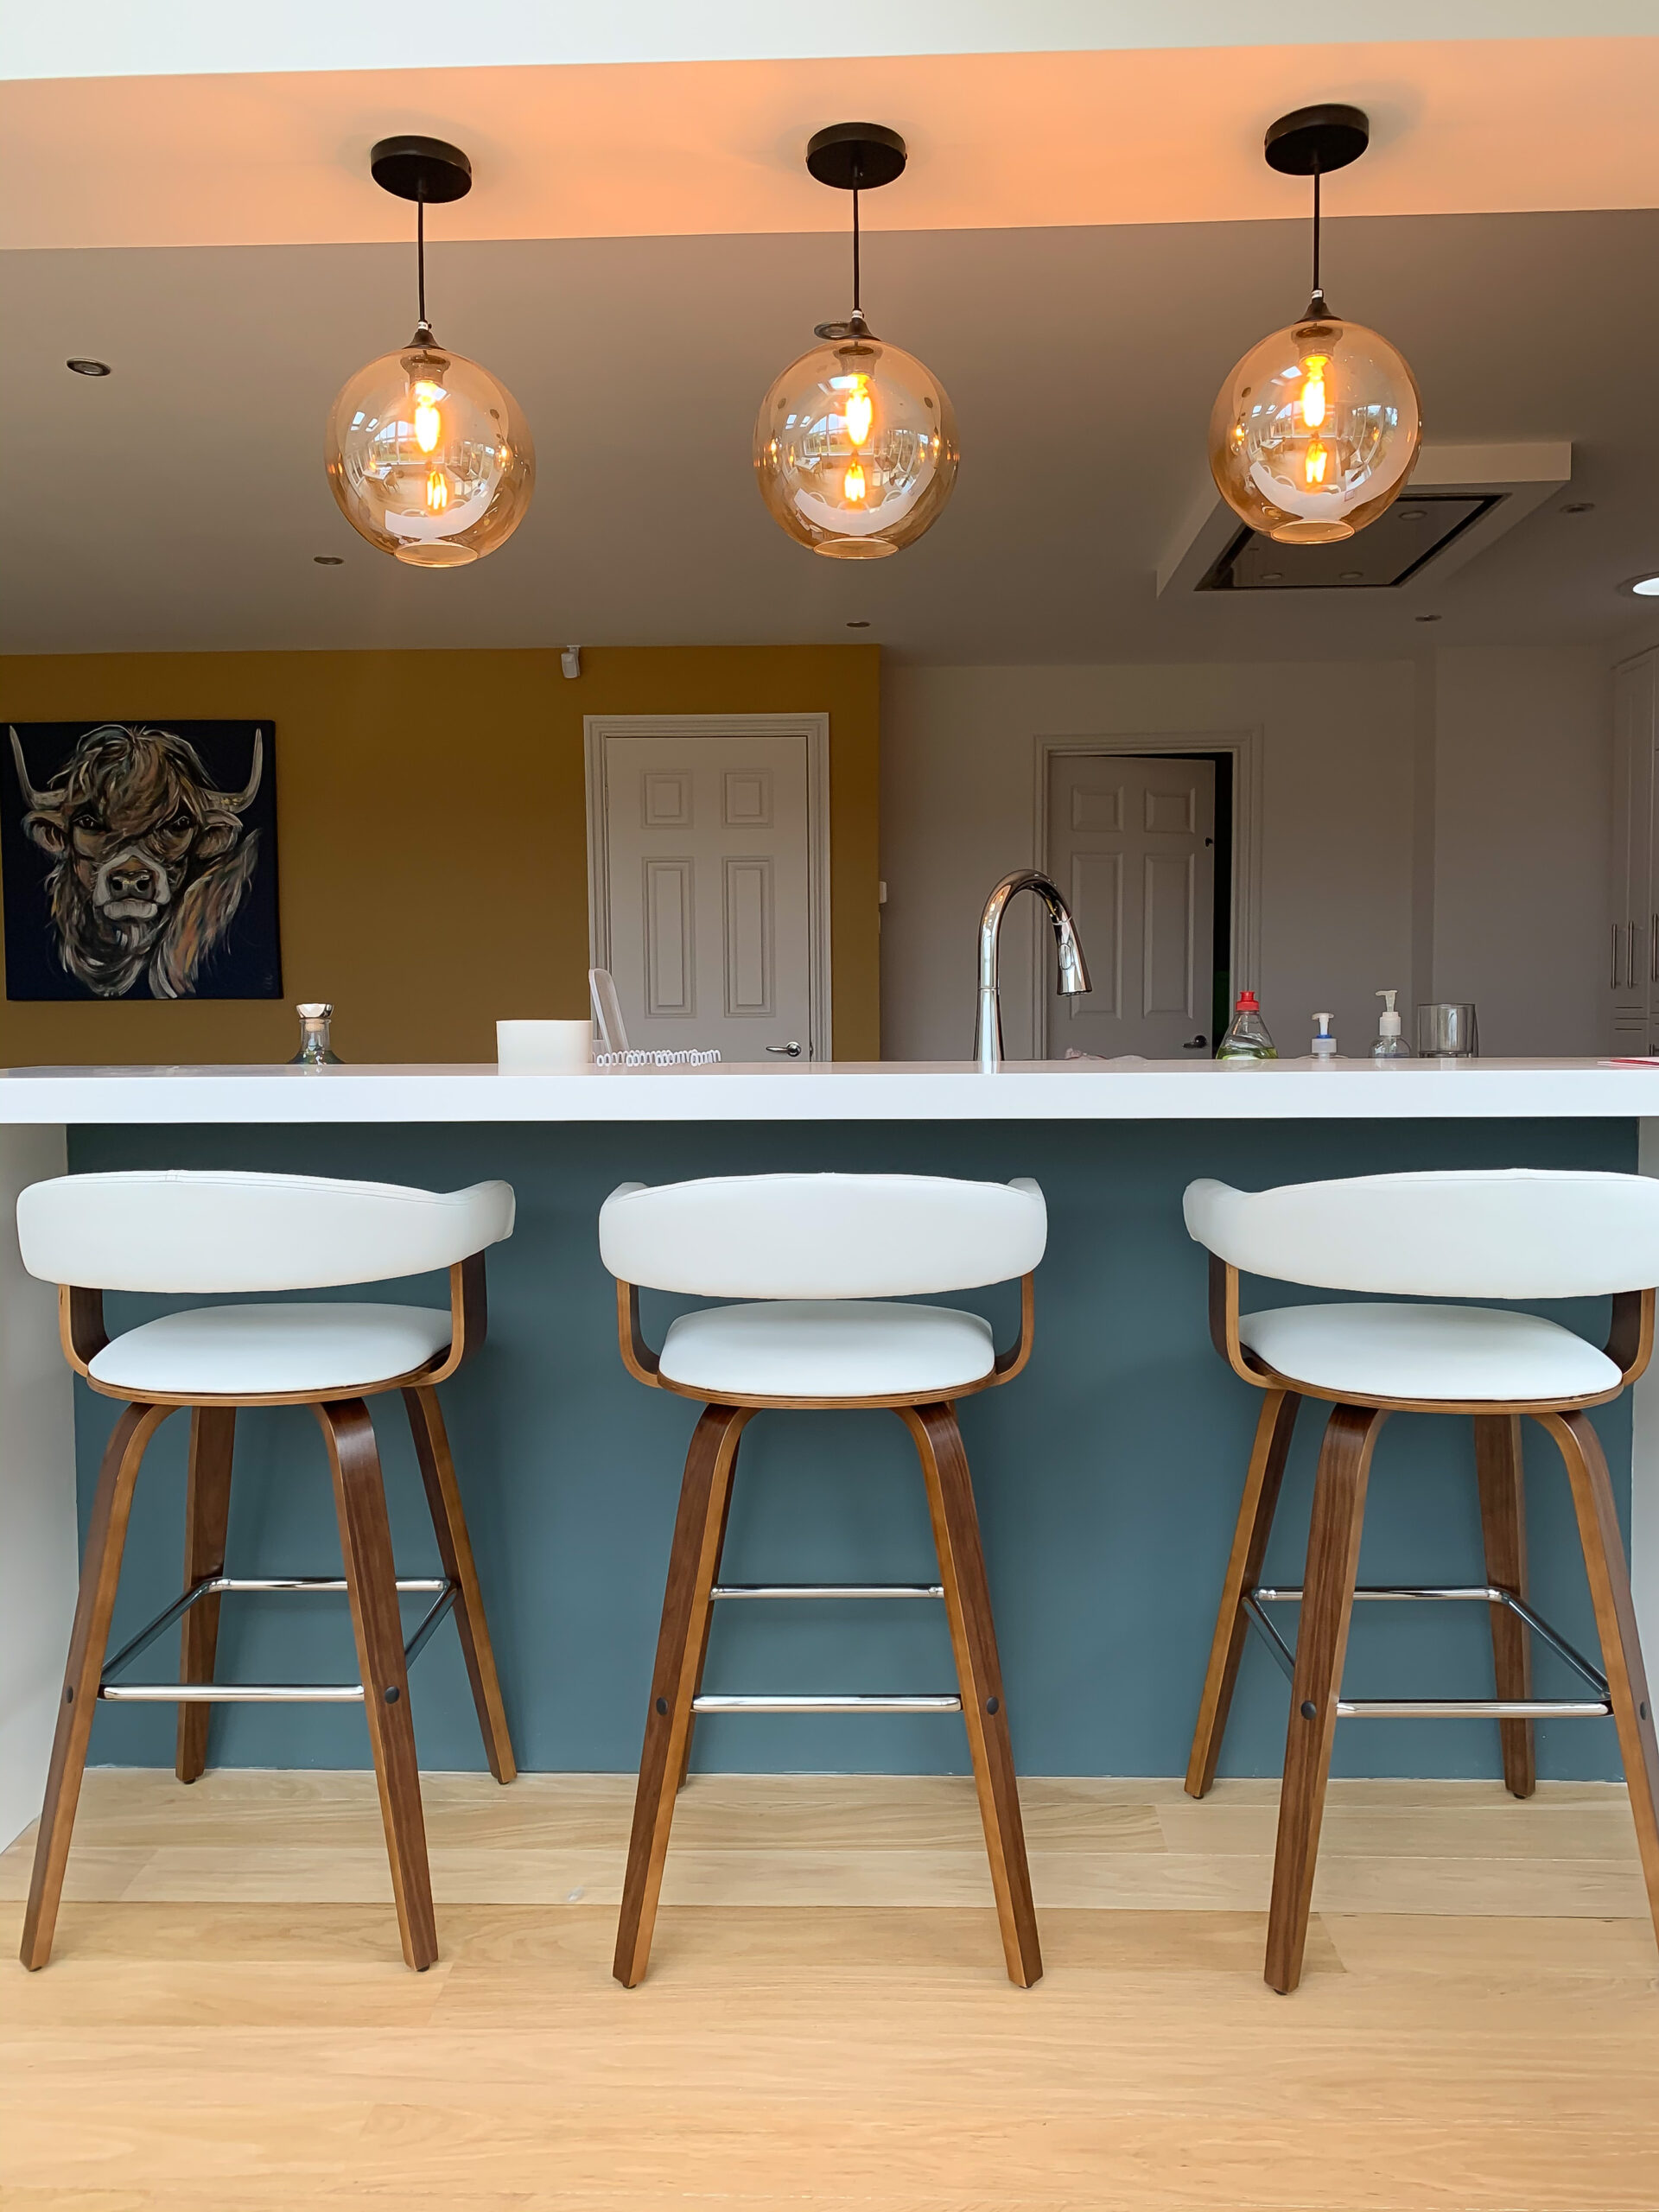 Balanced photo of three hanging light fittings over three bar stools in High Leigh